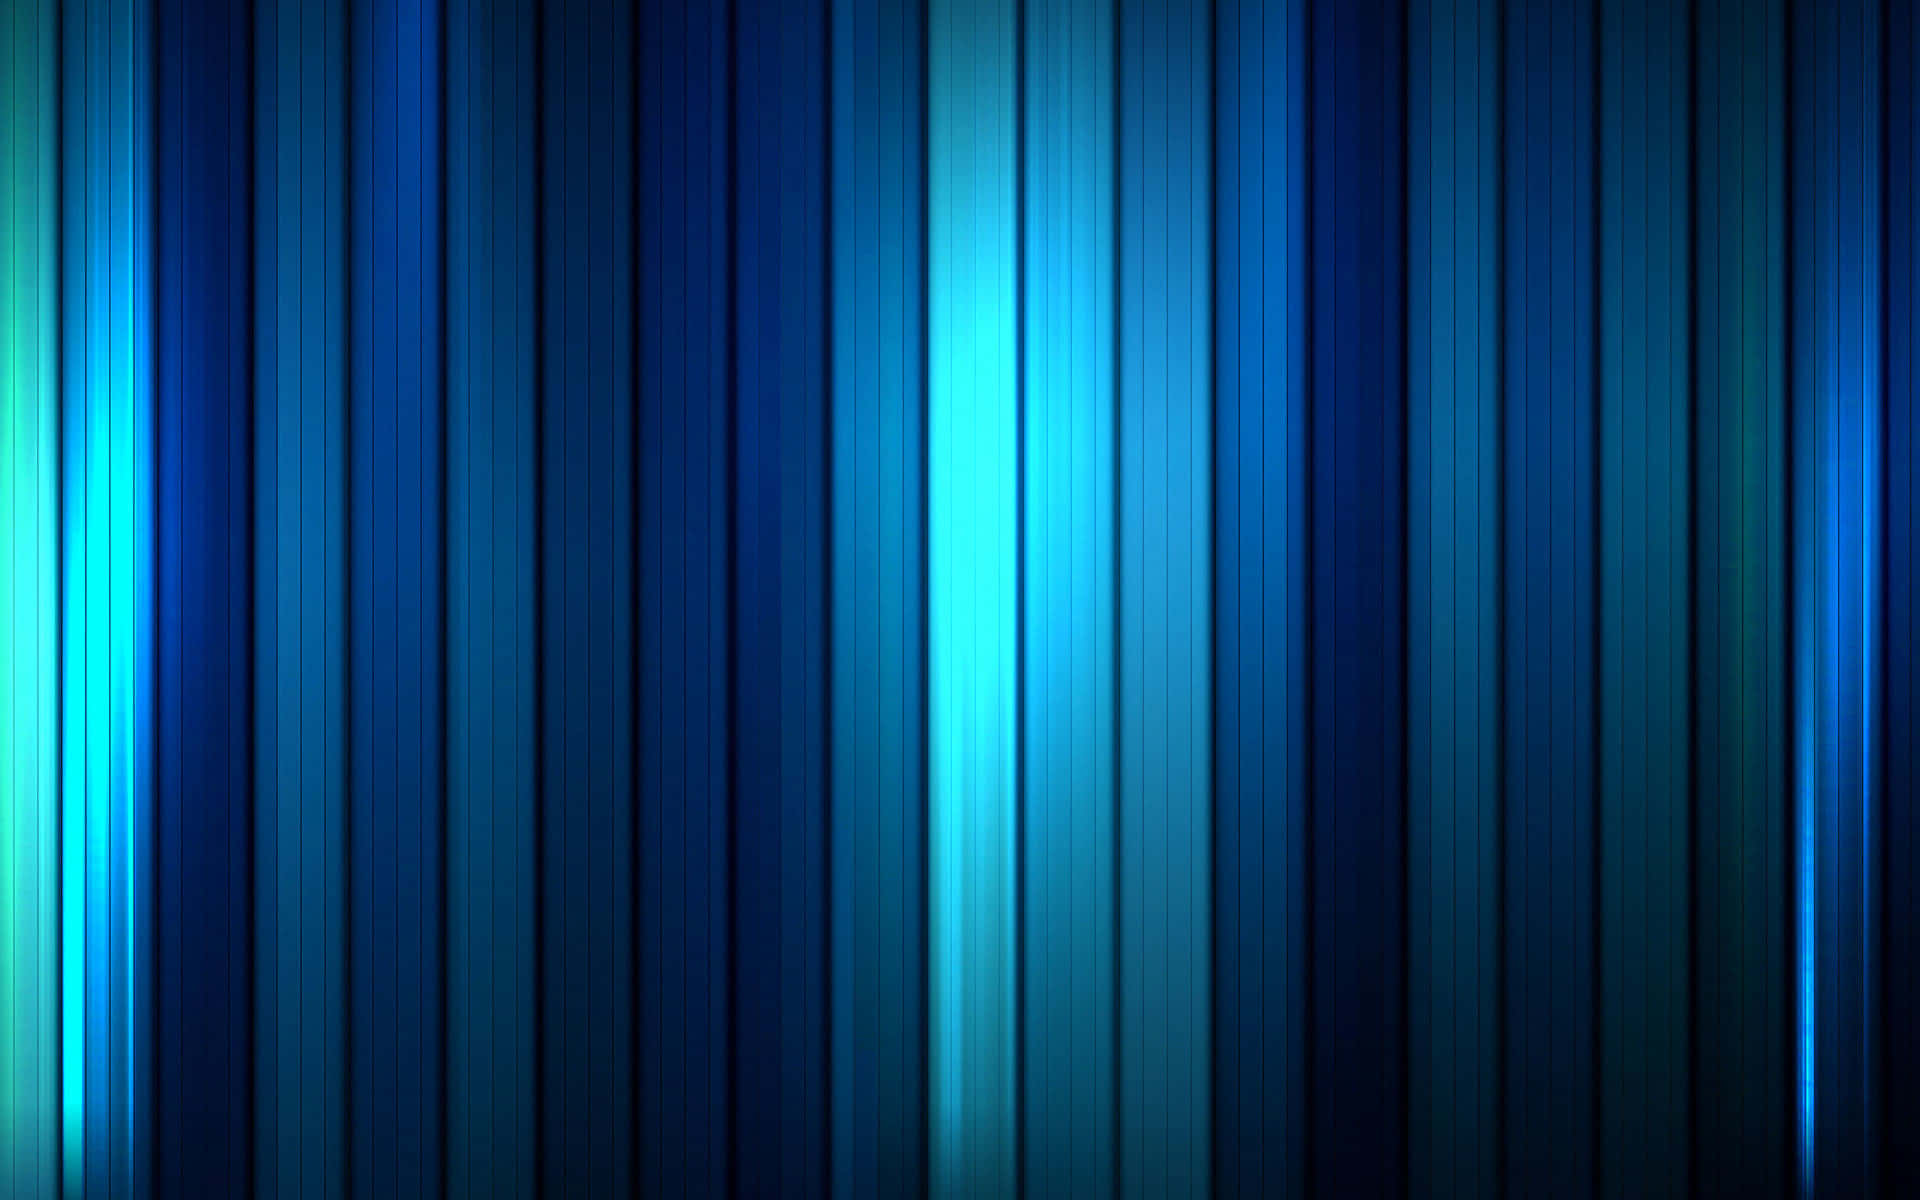 "Cool and Relaxing - an Abstract Blue Background"